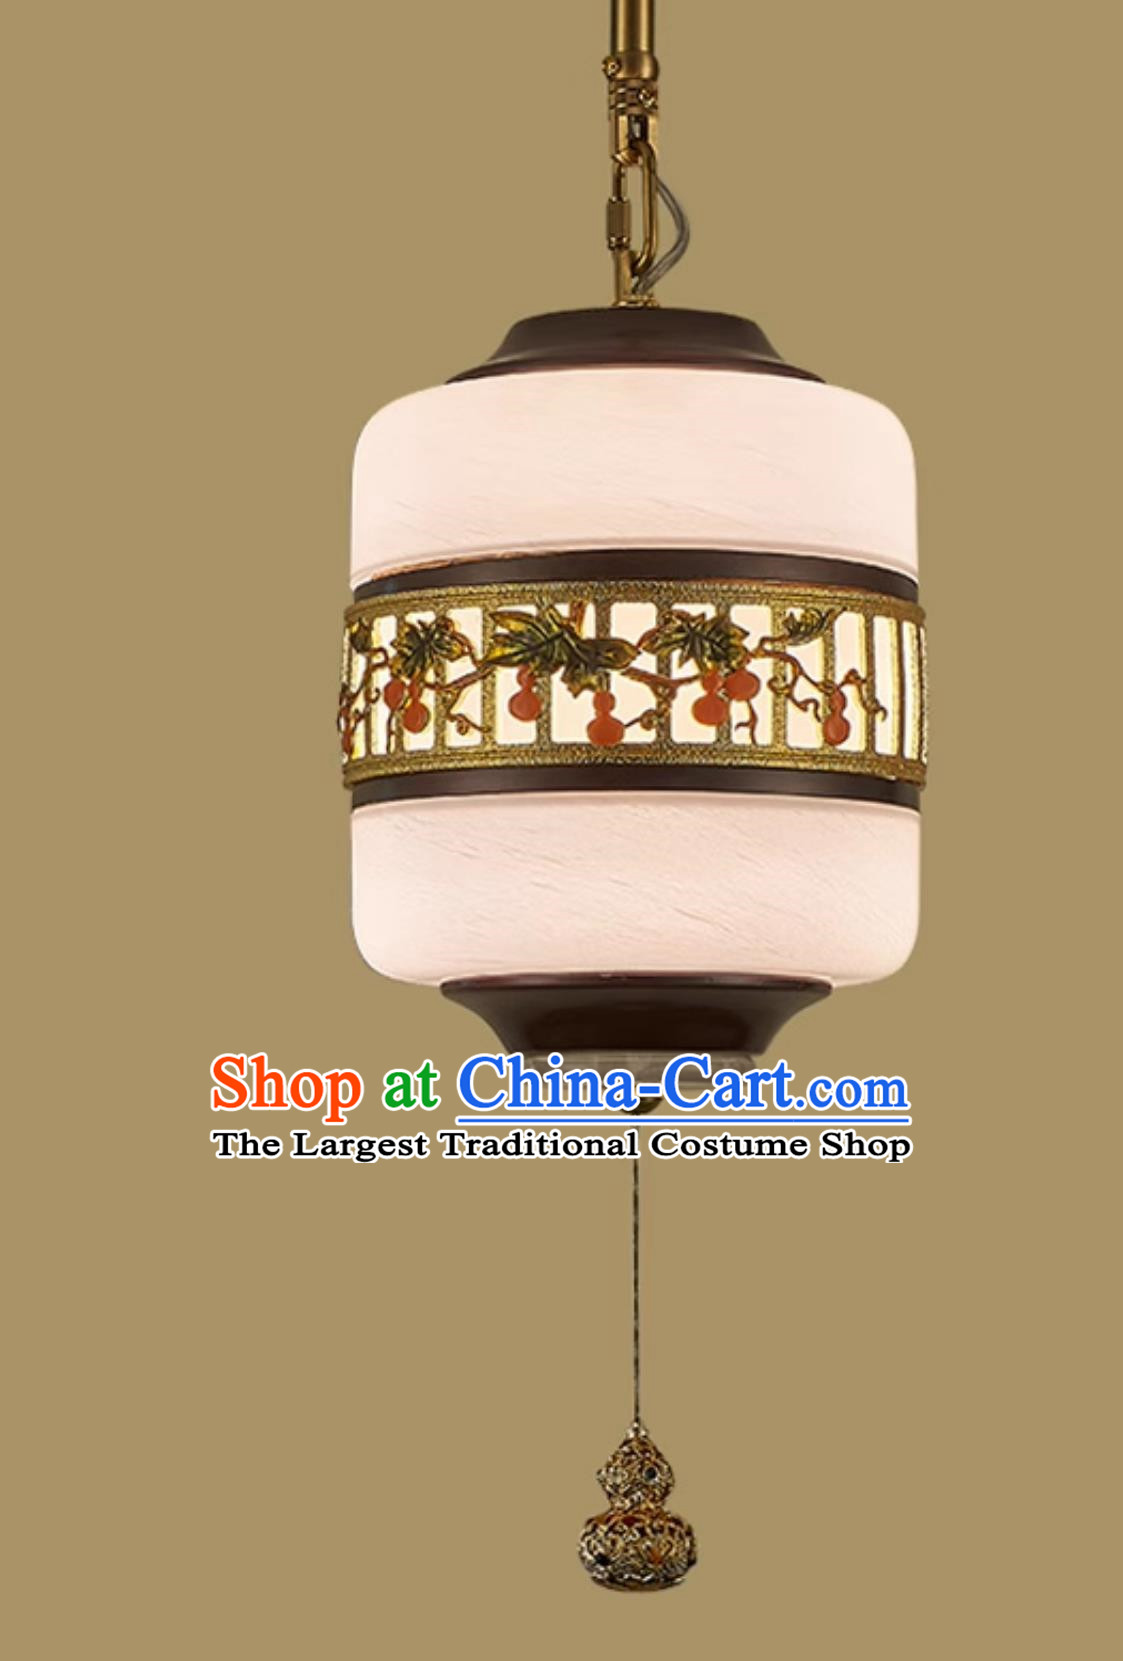 8 Inches Diameter Chinese Style Bedroom Chandelier Dining Room Study Lamp Solid Wood Lamp